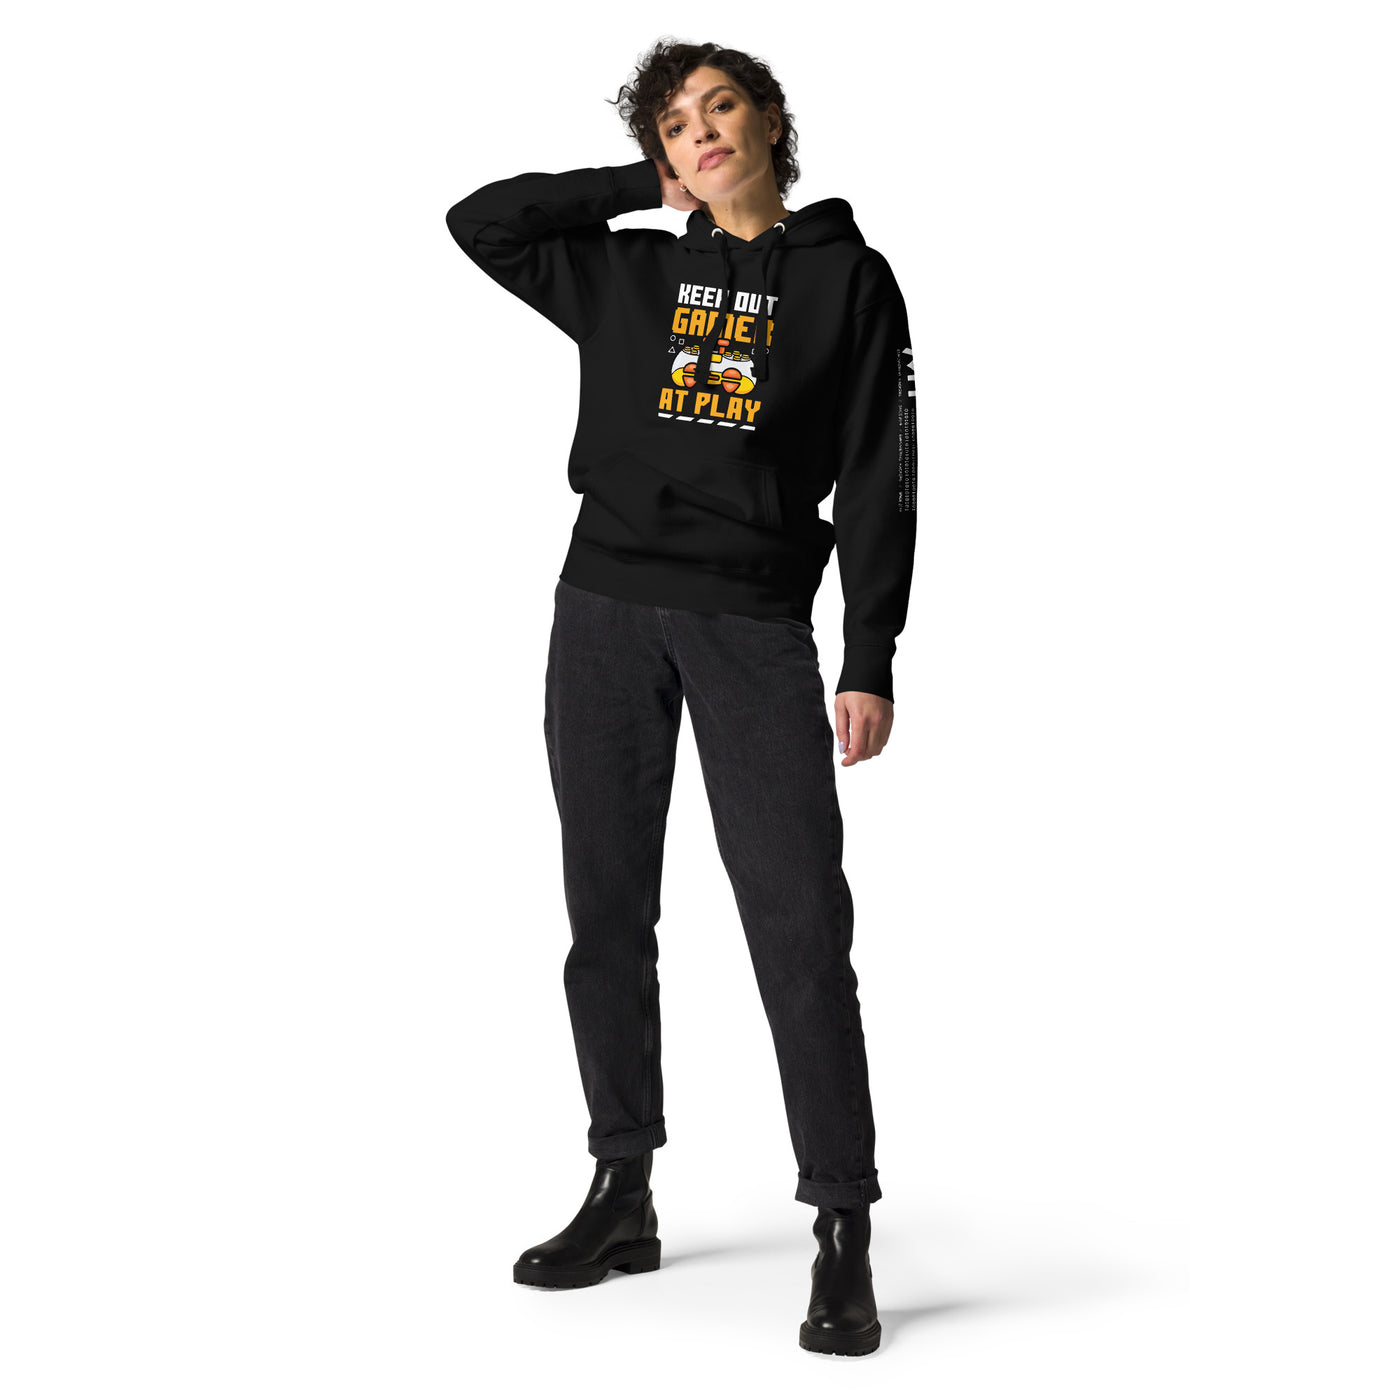 Keep Out Gamer At Play Rima 7 - Unisex Hoodie